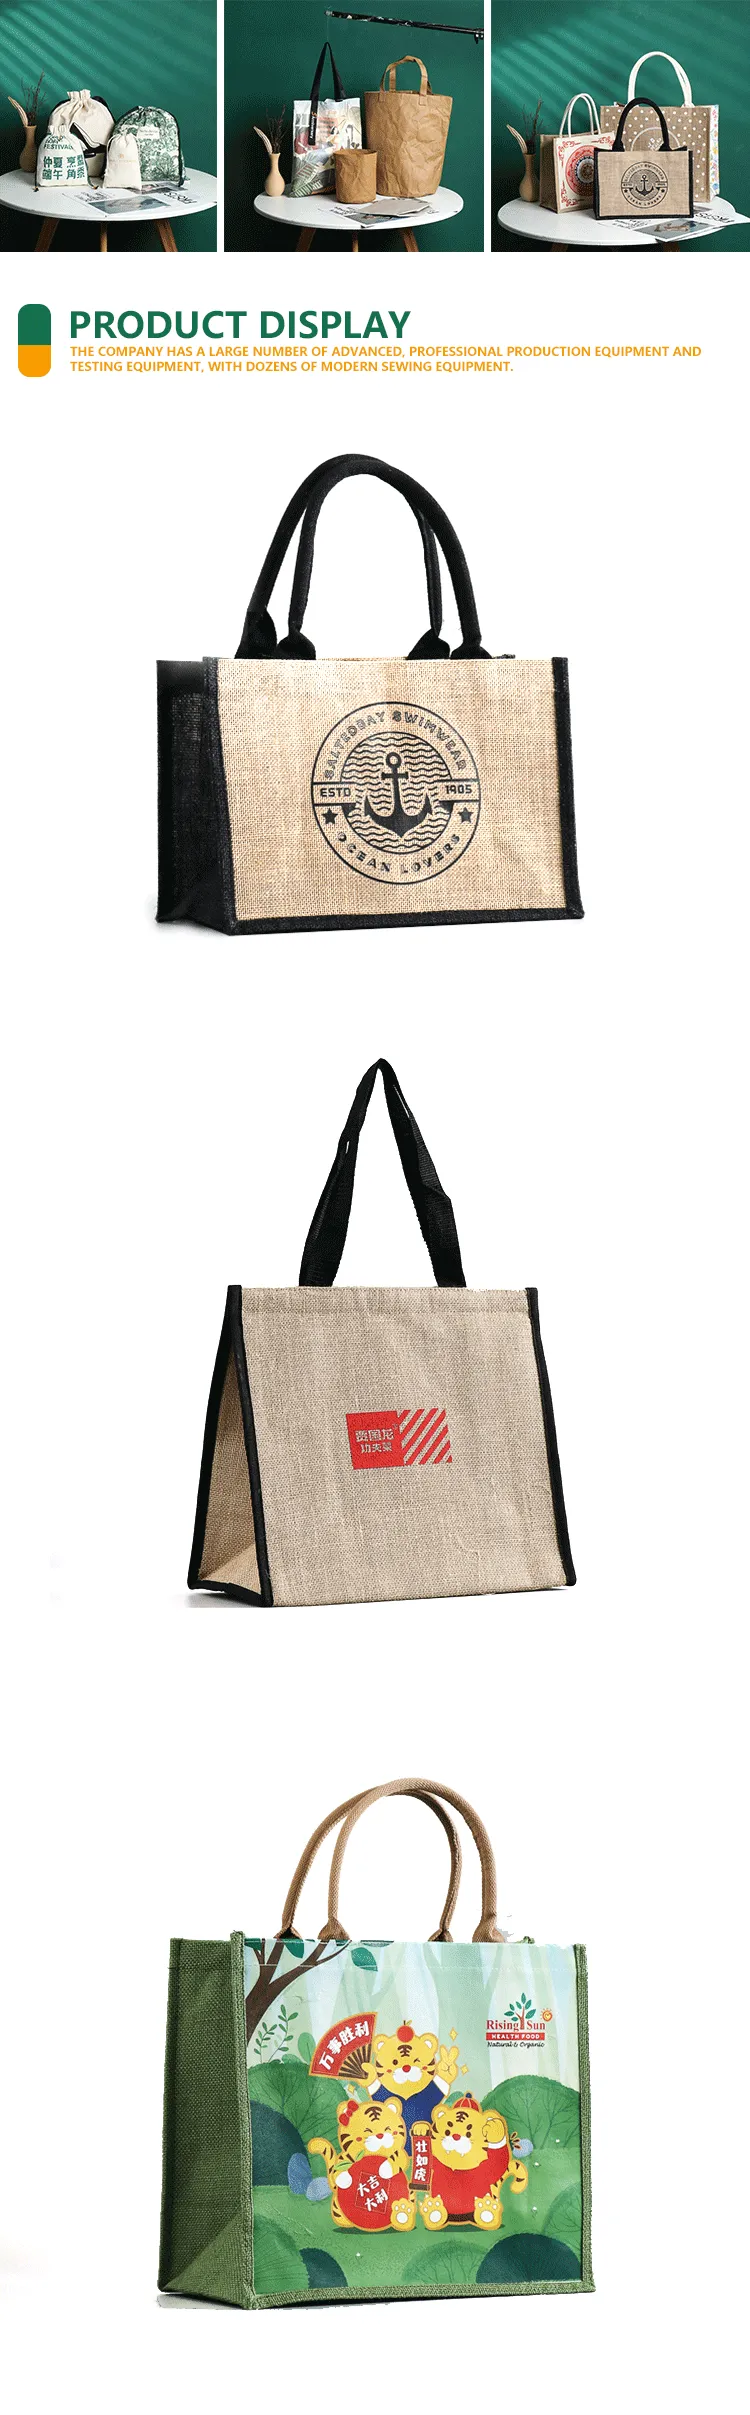 Use our environment-friendly large jute tote bag